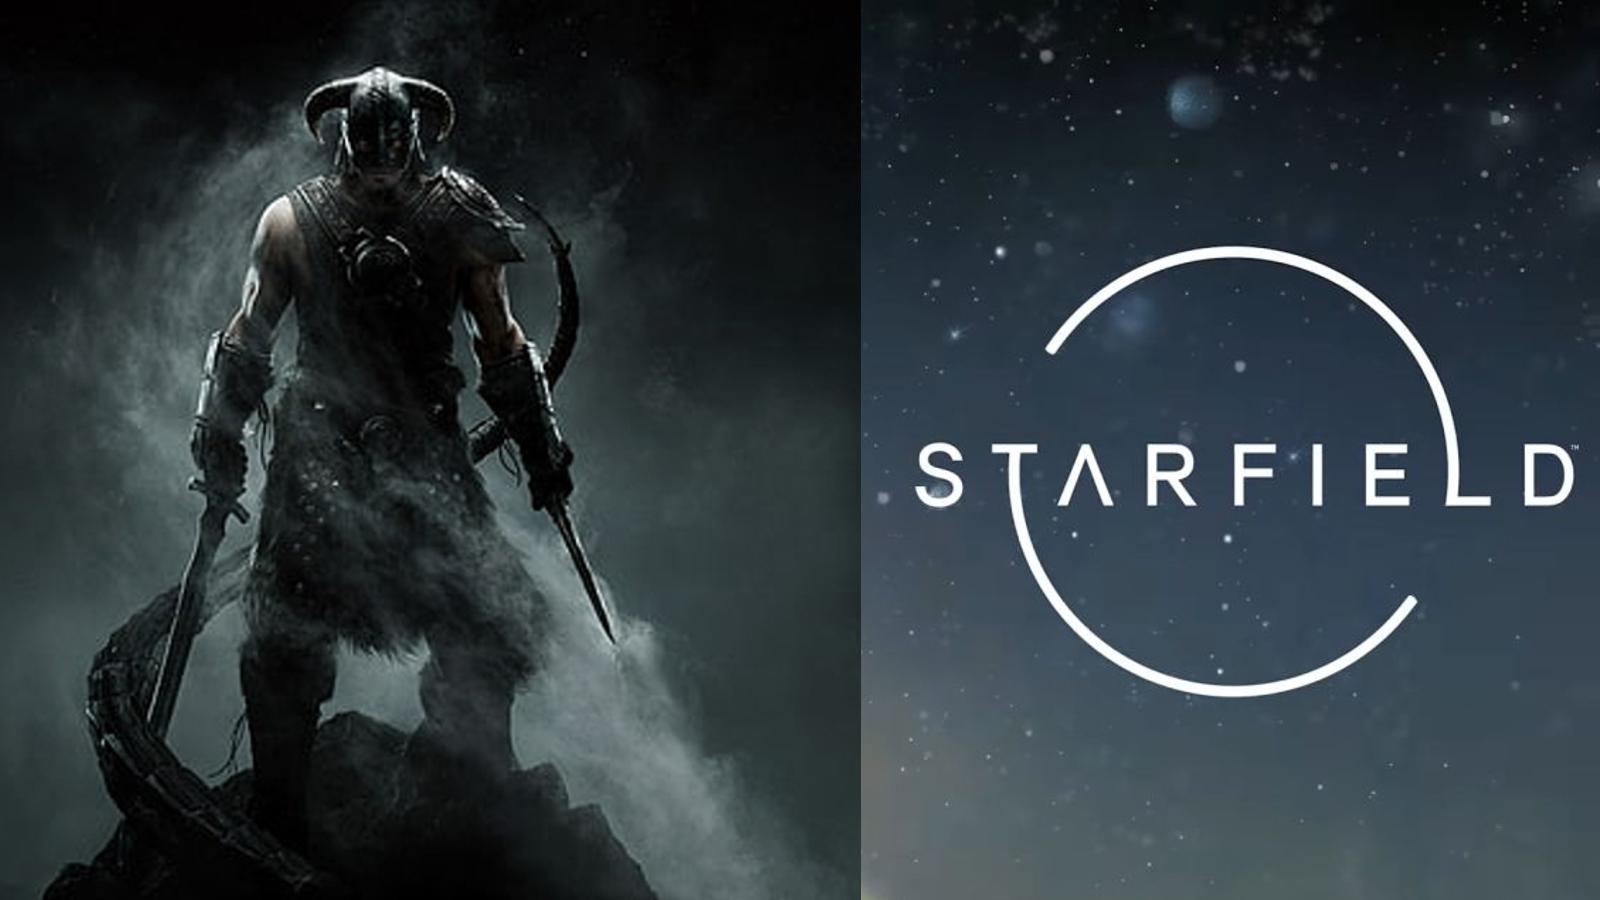 Making the Best Starfield is Absolutely Our Goal” – Xbox Boss